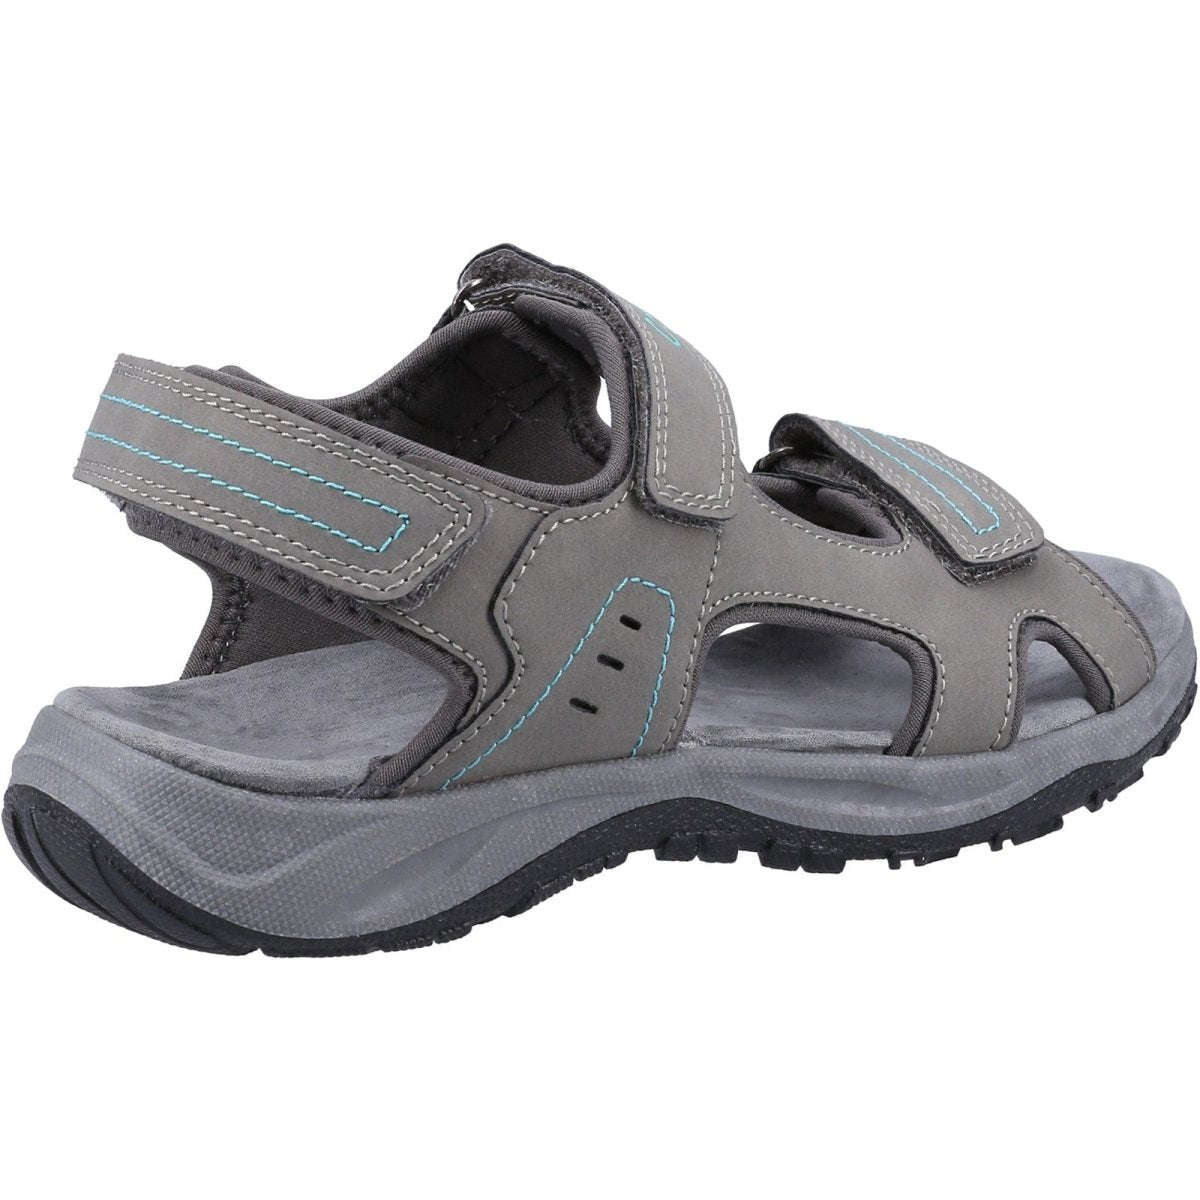 Cotswold Freshford Ladies Lightweight Recycled Sandals - Shoe Store Direct